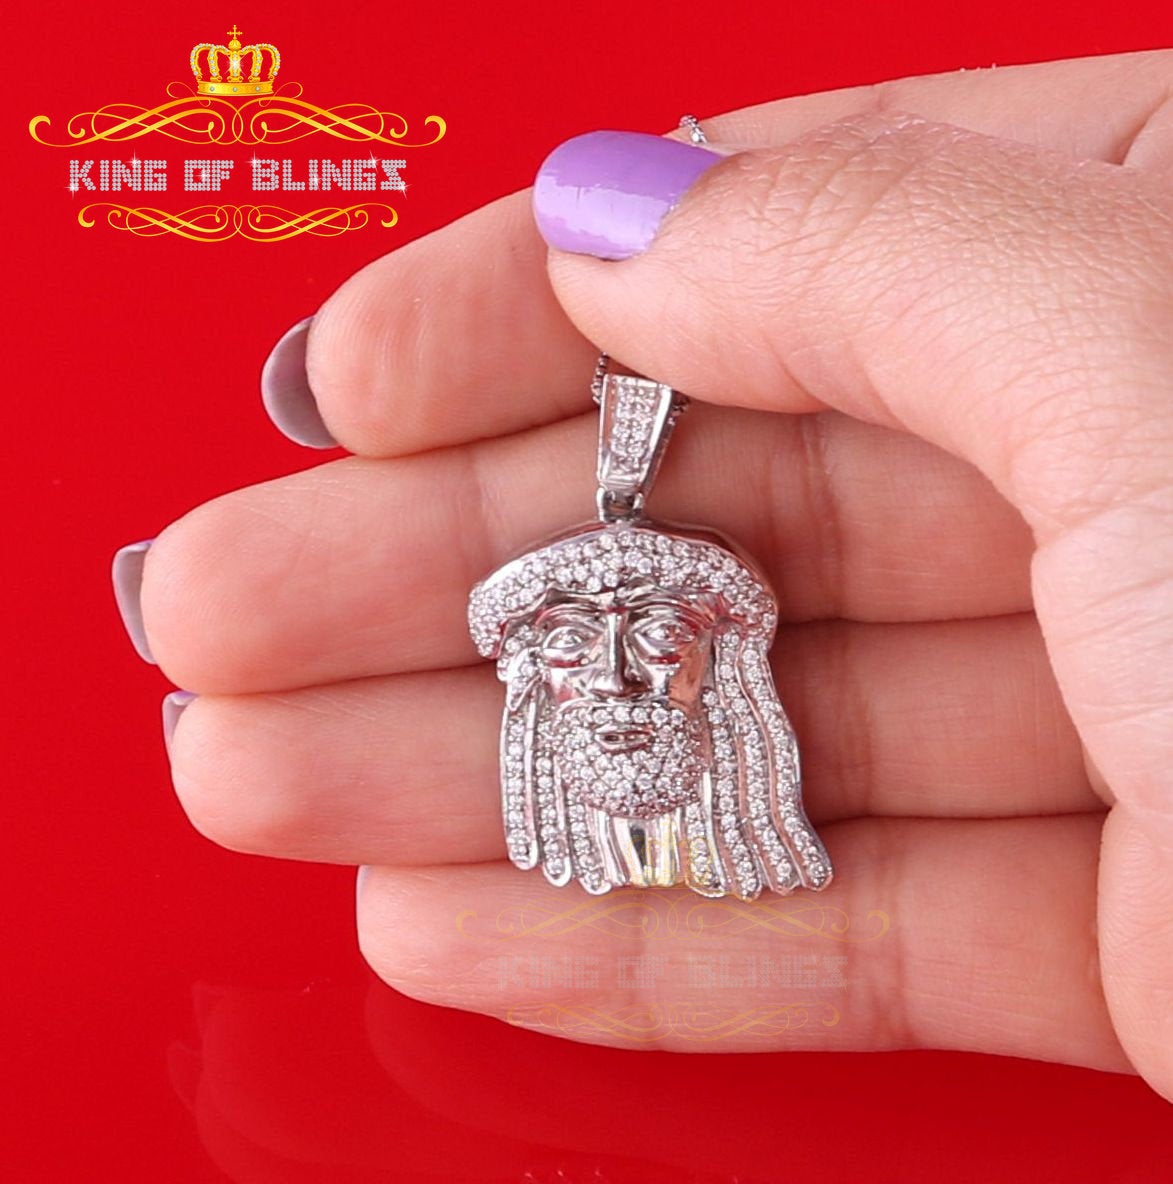 King Of Bling's White 925 Sterling Silver Pendant with Jesus Face Shape 1.89ct Cubic Zirconia KING OF BLINGS